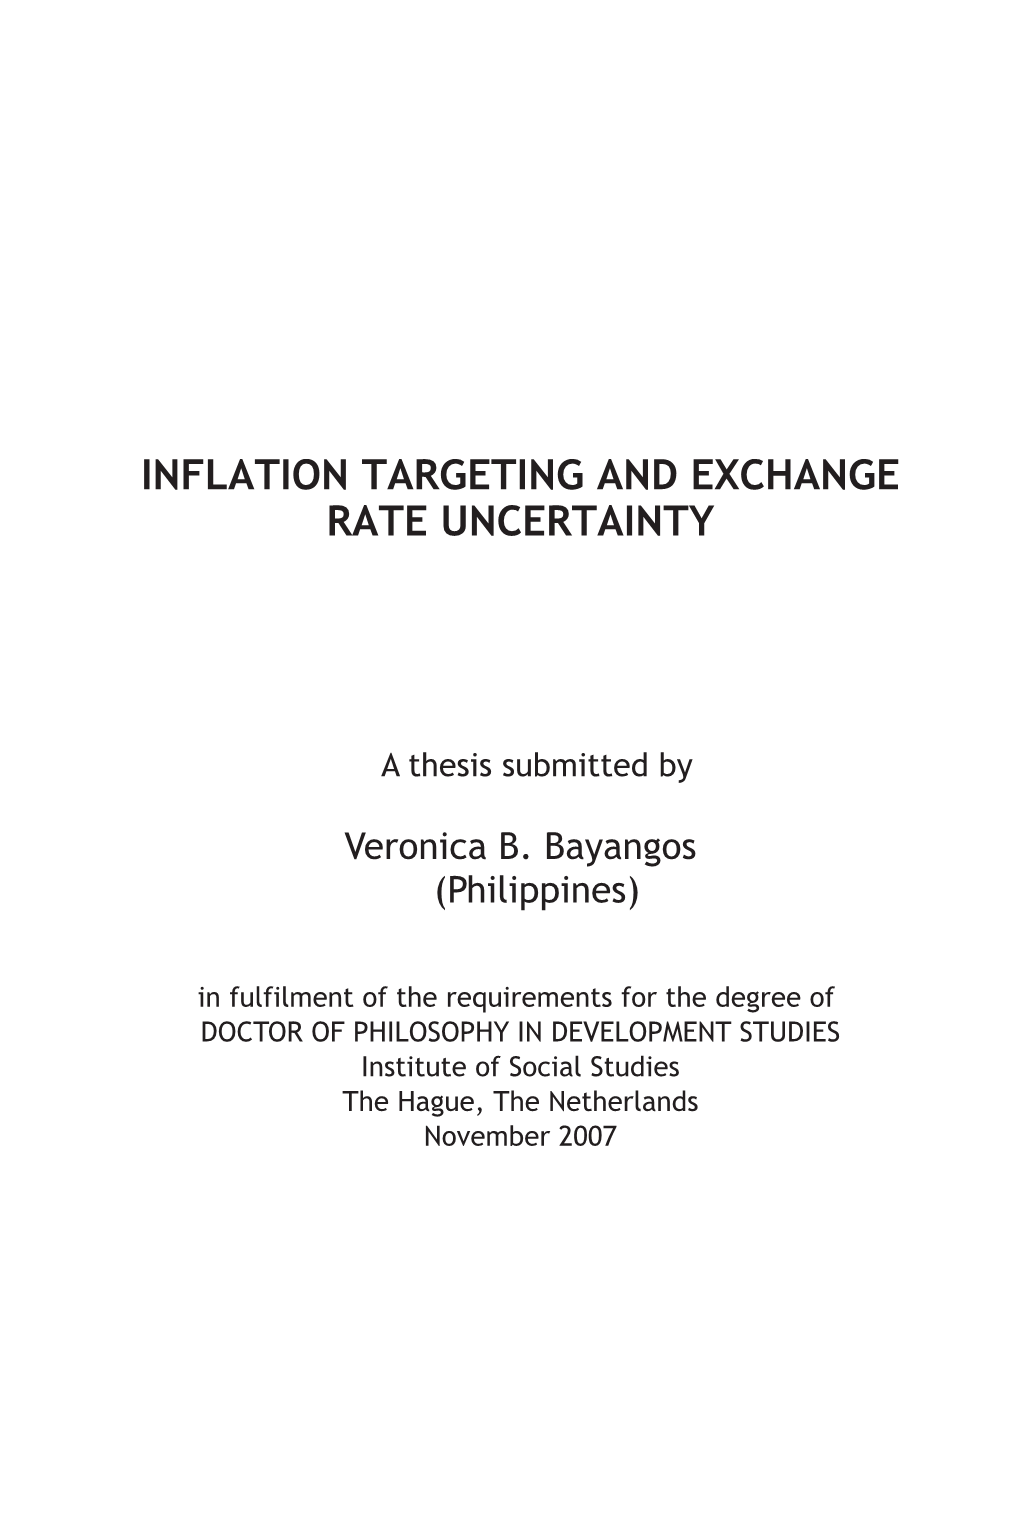 Inflation Targeting and Exchange Rate Uncertainty